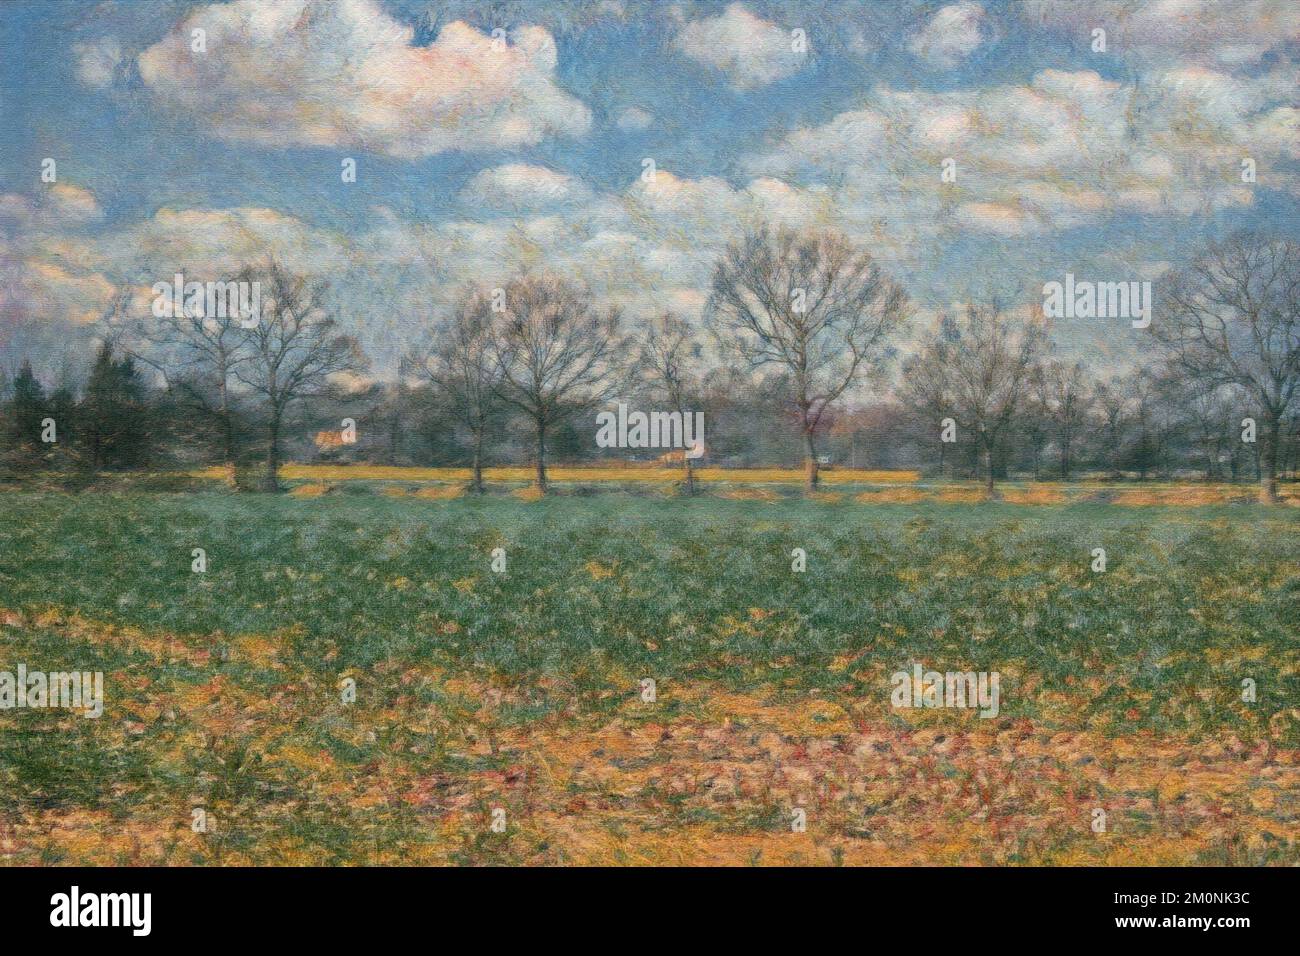 Digital painting of countryside landscape showing agricultural field and leafless trees under cloudy blue sky, impressionism style Stock Photo